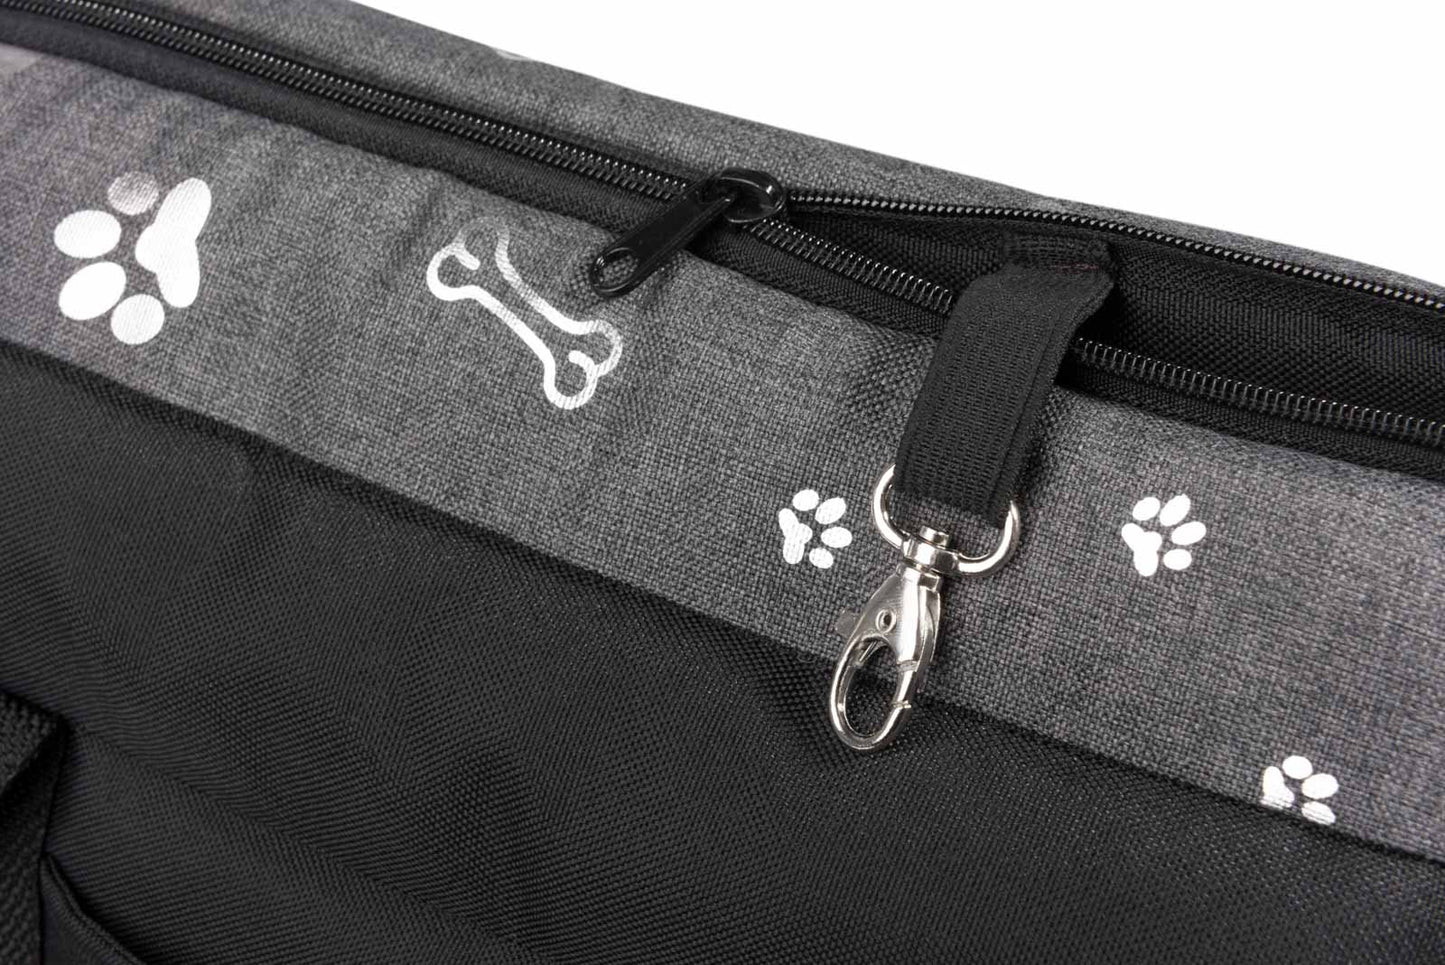 Pet Bag ROYAL - Bag for walking dogs and cats. Handmade accessories for dogs.